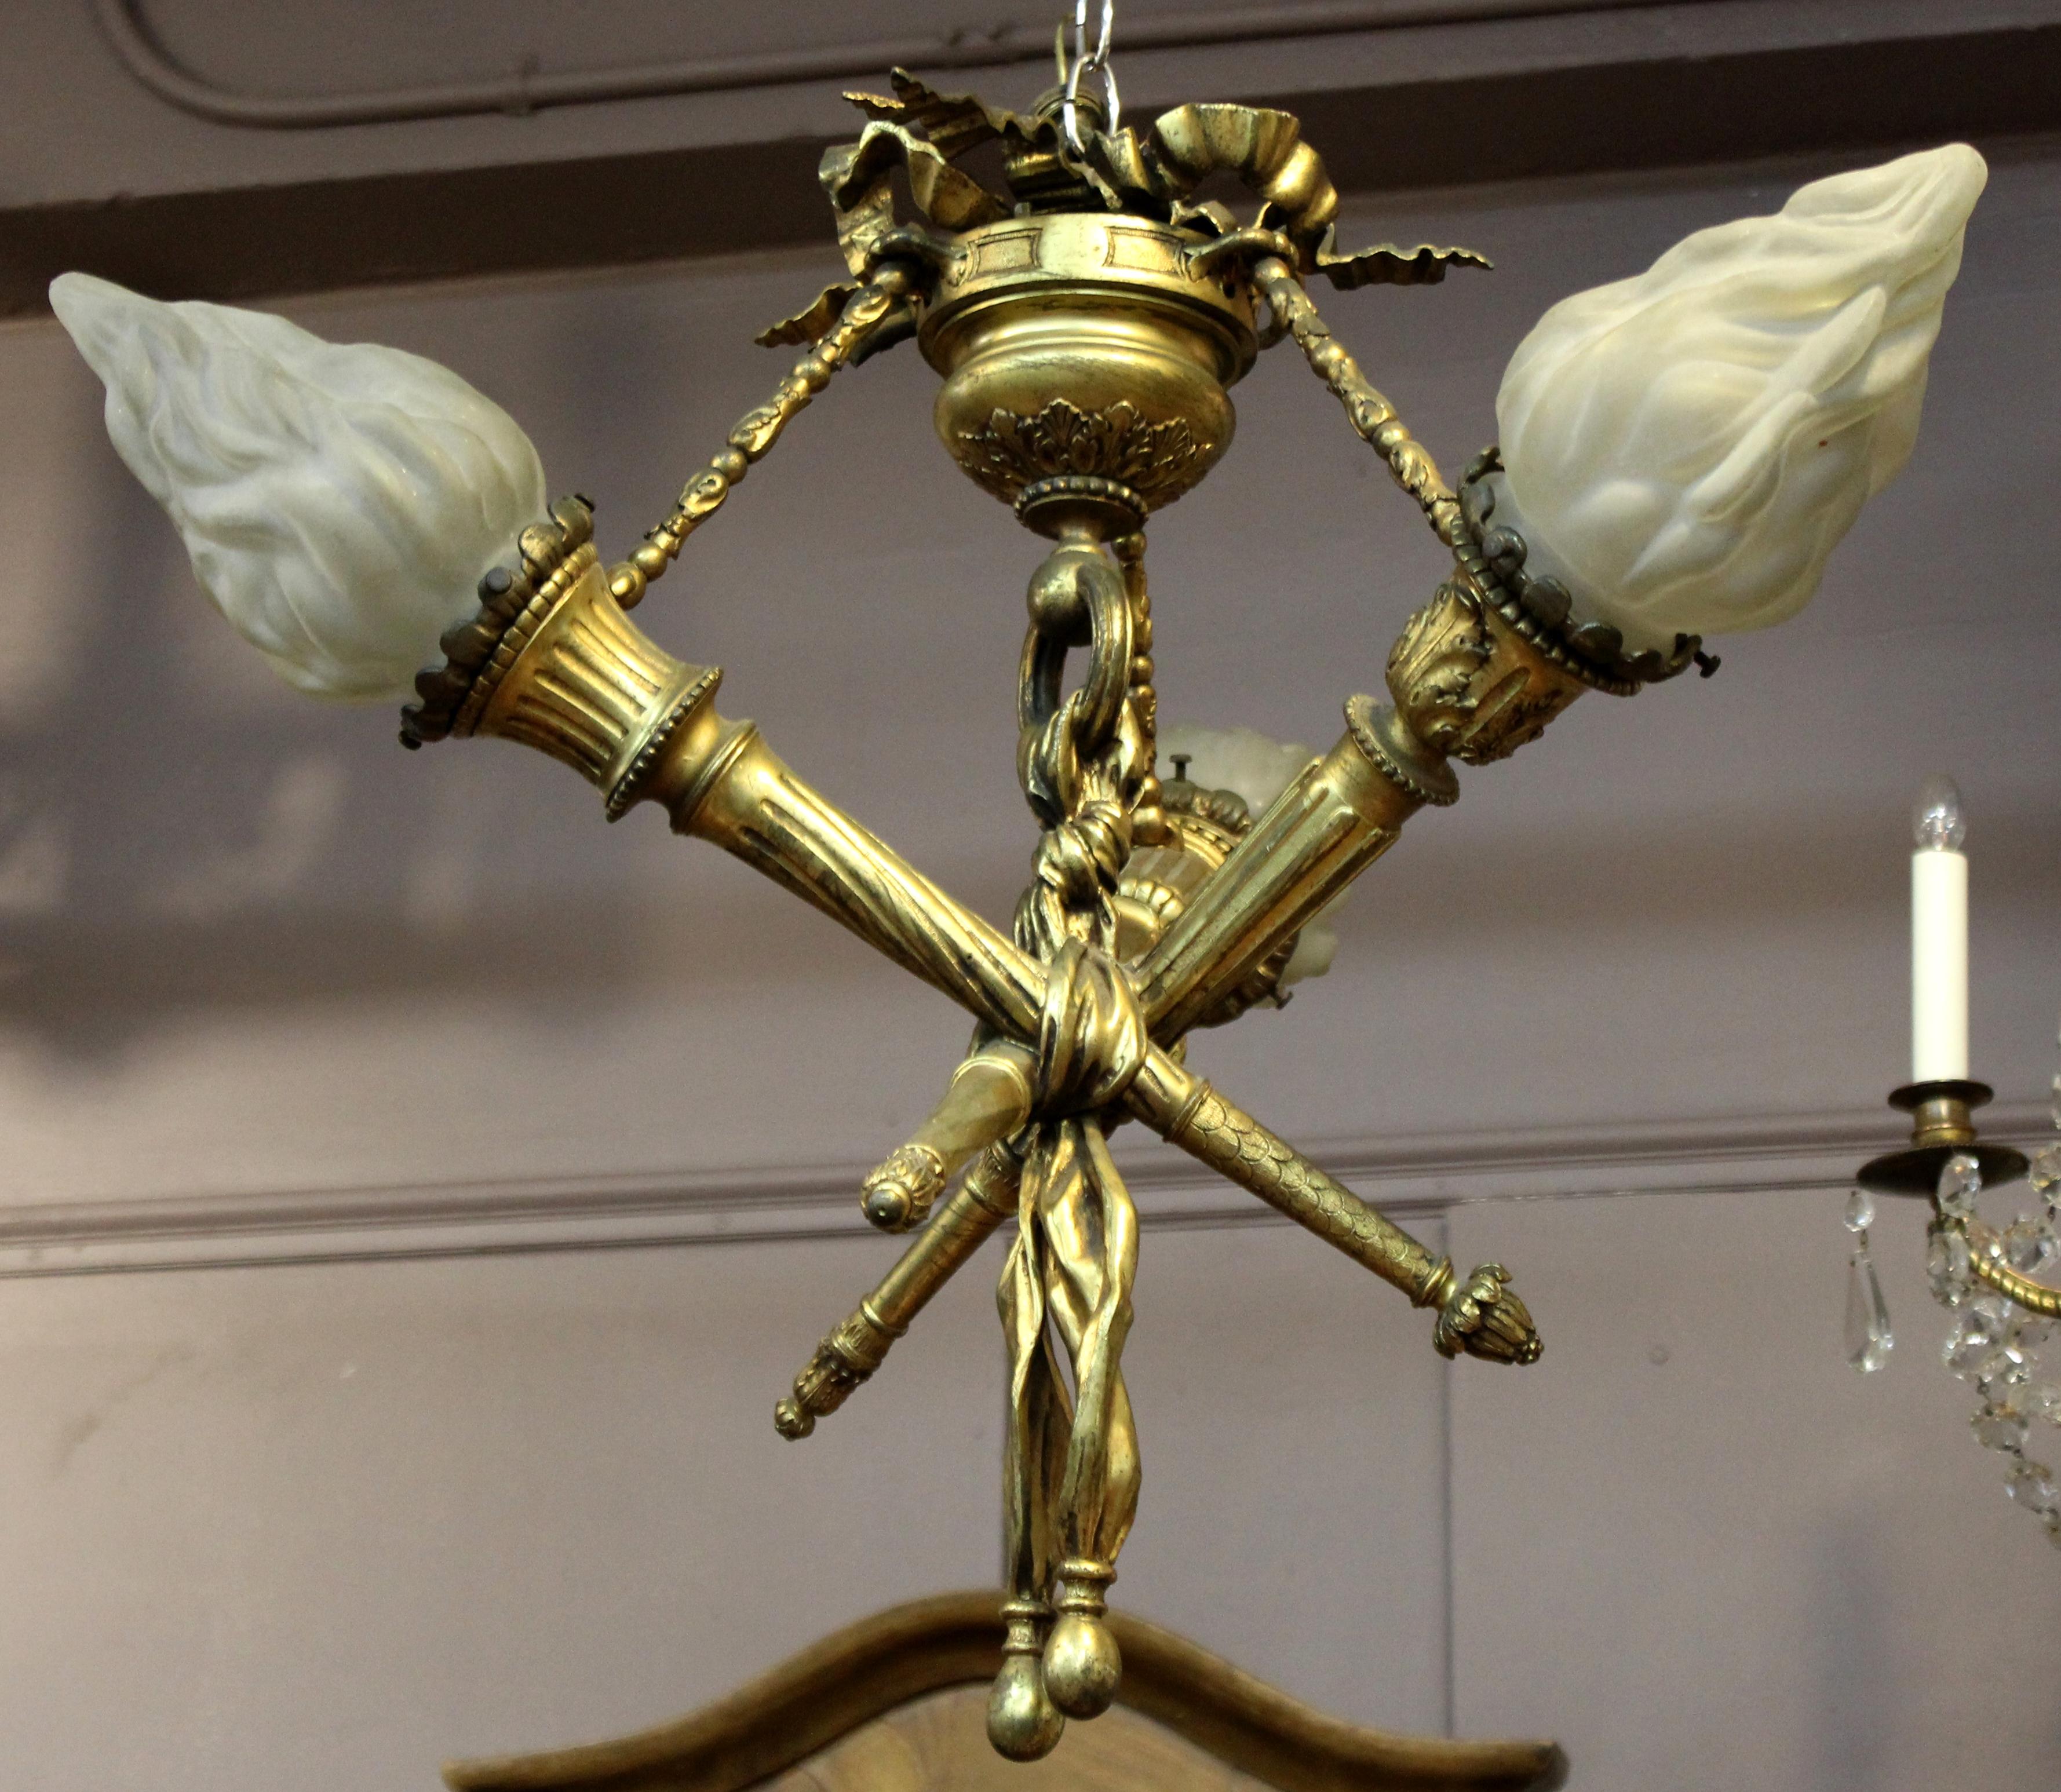 French neoclassical Revival gilt bronze pendant ceiling light with three bound torches with fire-shaped glass shades. The piece was made during the late 19th century and is in great vintage condition, with some age-appropriate wear and patina to the